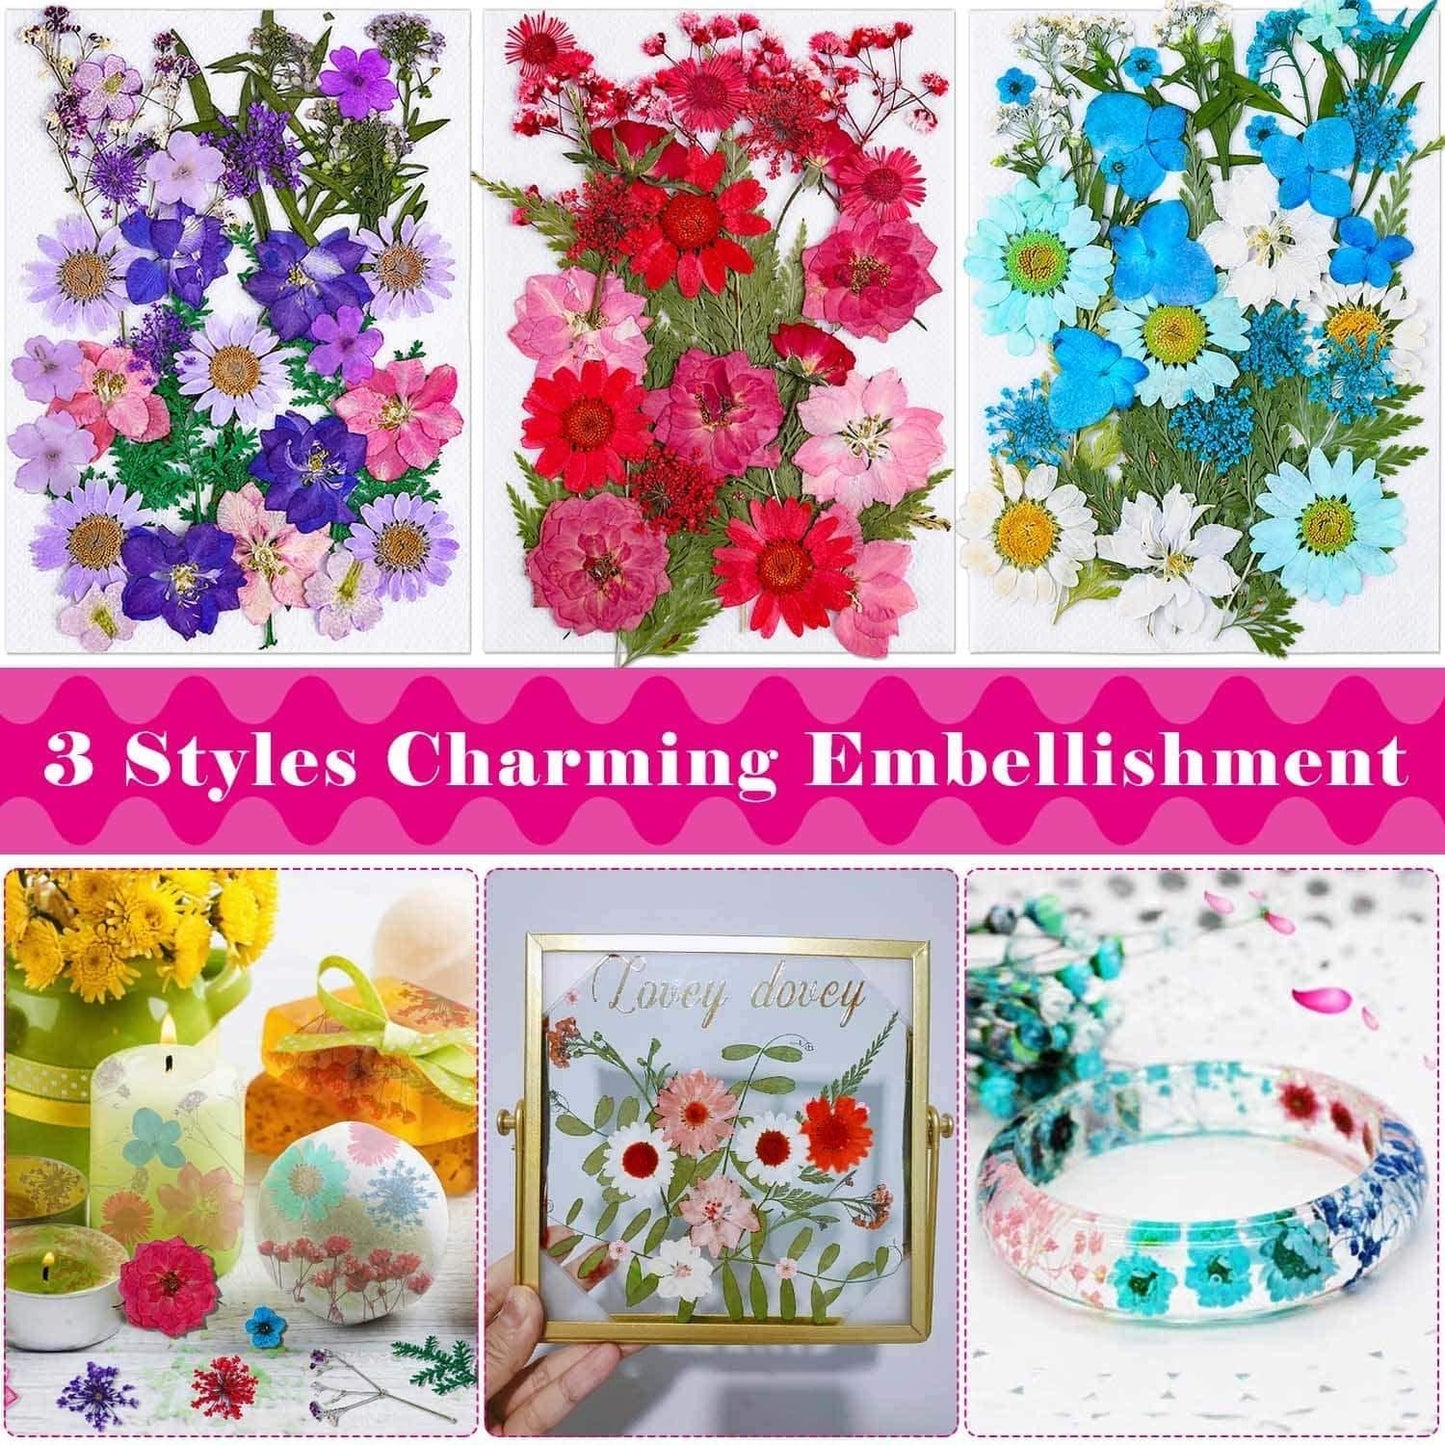 100Pcs Pressed Dried Flowers for Resin Molds, Natural Dried Flower Herbs Kit for Scrapbooking Supplies Card Making Supplies Resin Jewelry Making Soap and Candle Making(Blue, Purple, Red) - WoodArtSupply